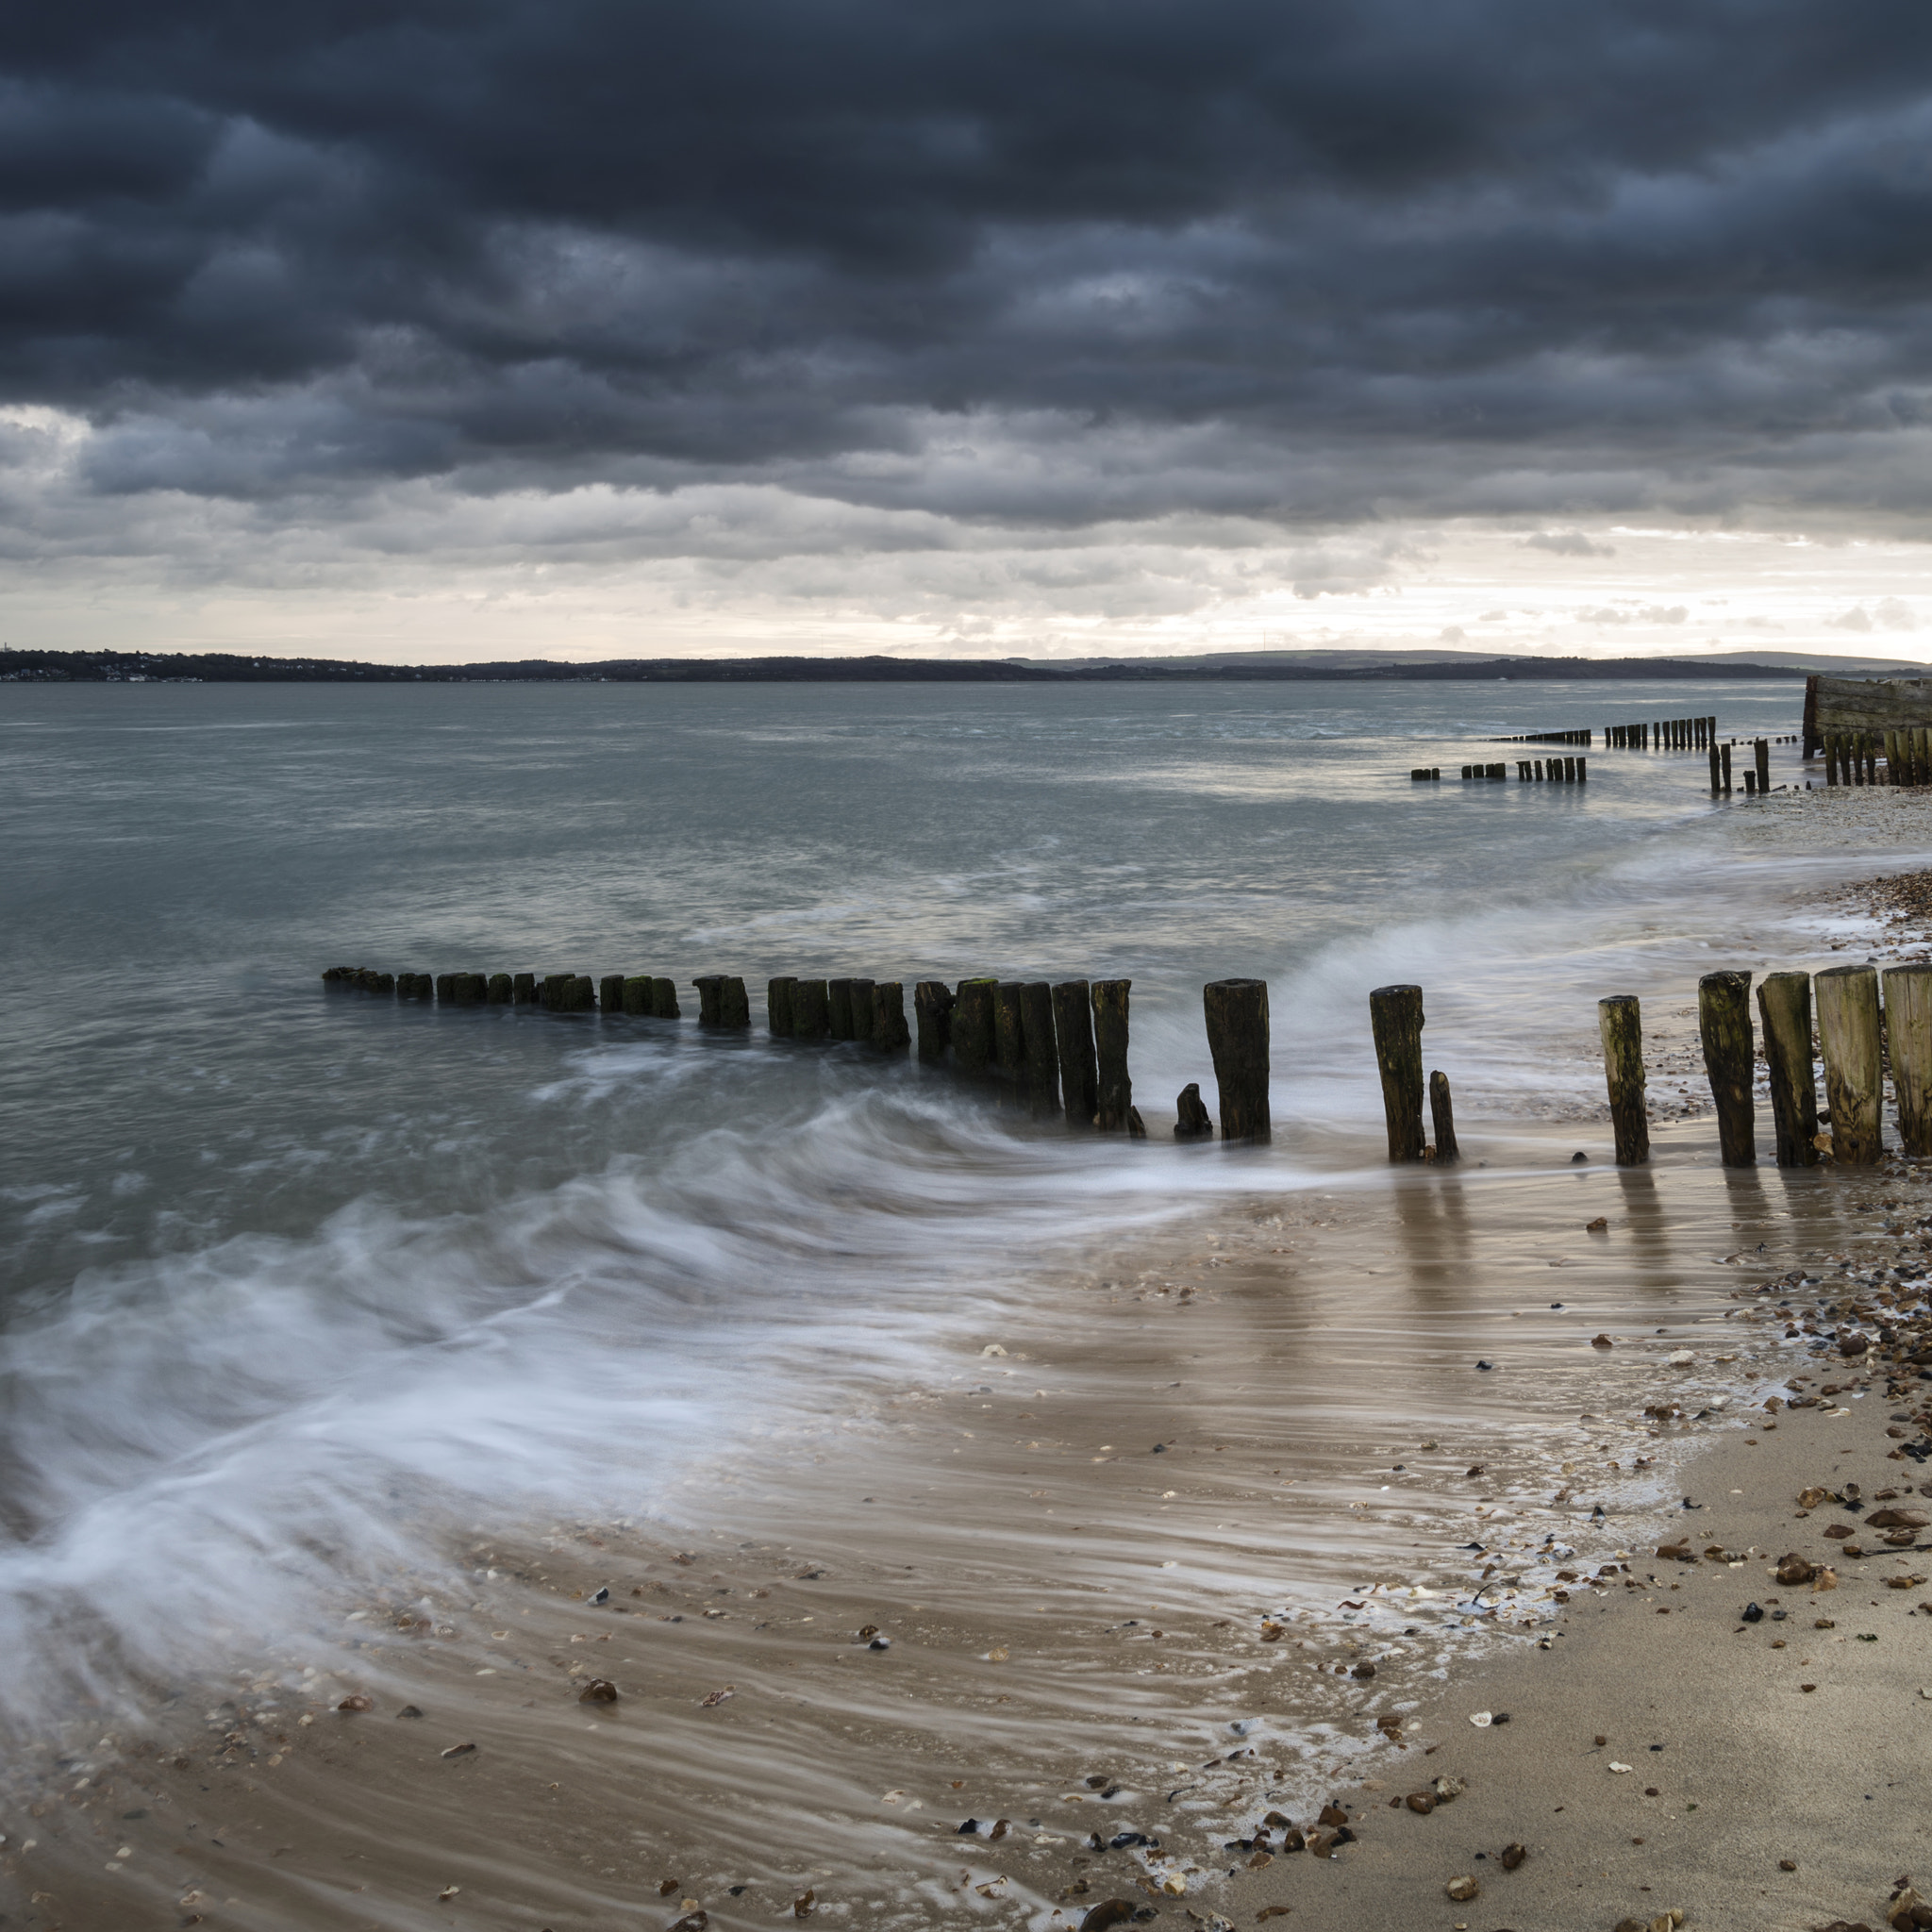 Nikon D800 + Nikon AF-S Nikkor 24-85mm F3.5-4.5G ED VR sample photo. Storm passing over beach landscape with long exposure and vibran photography